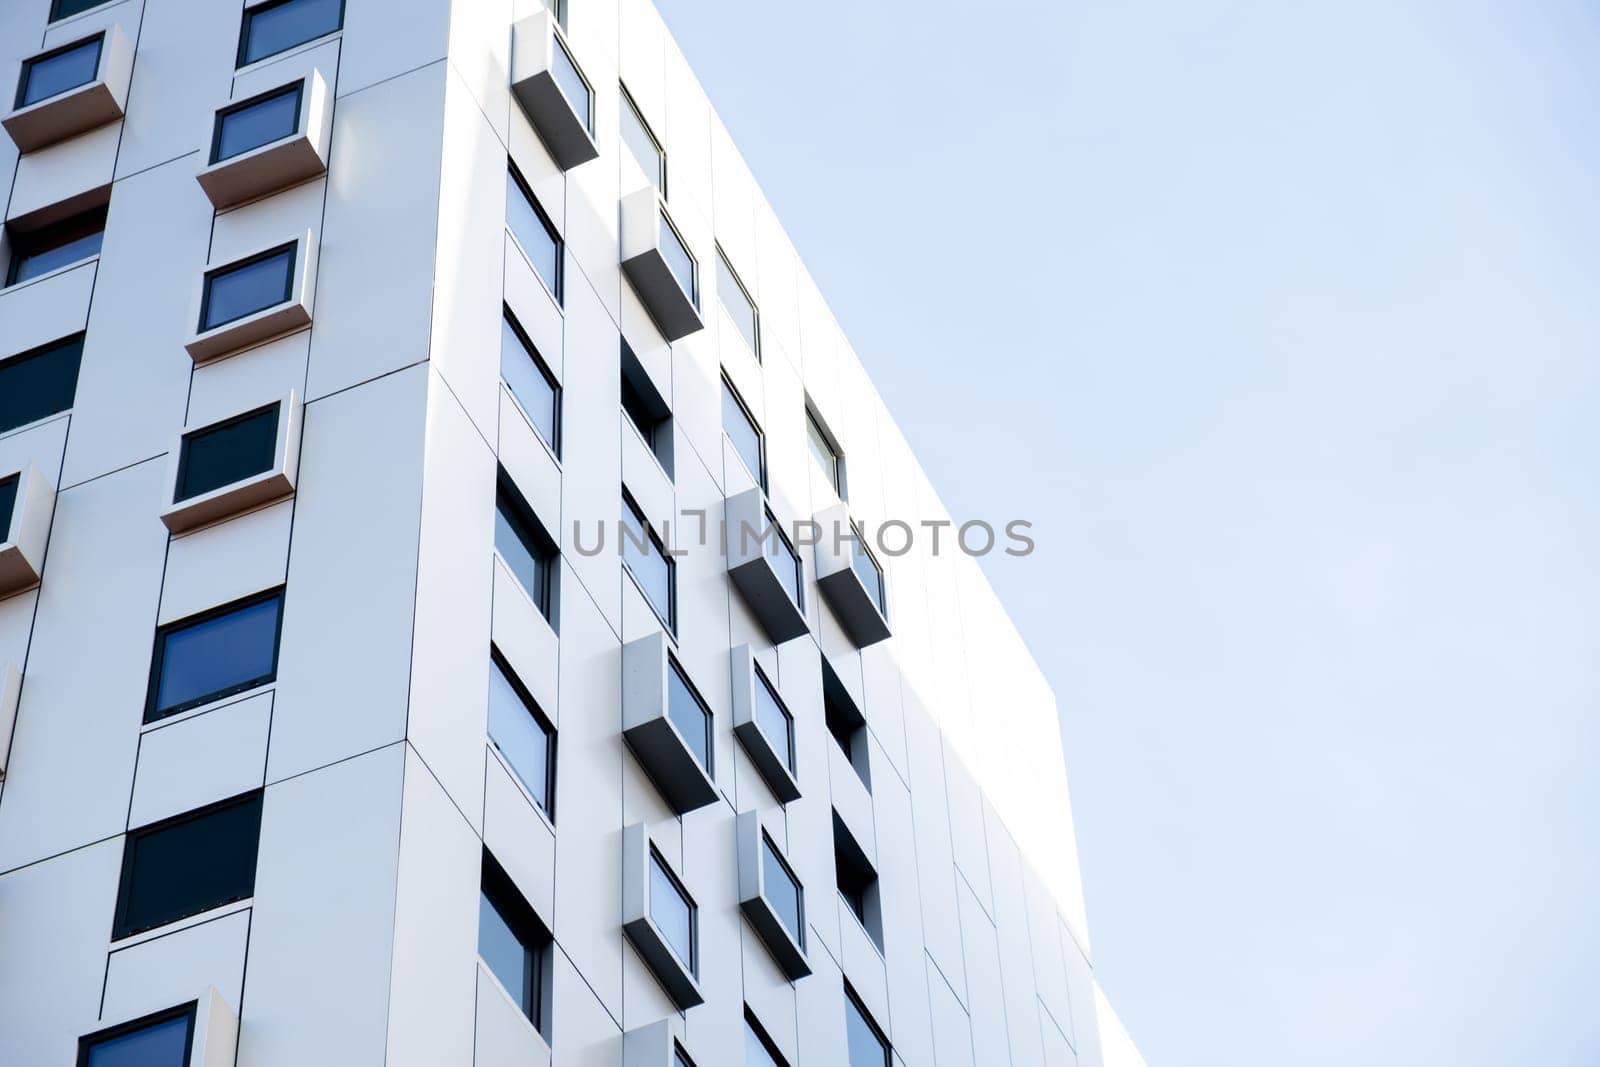 Modern white building with square windows. Multistory apartment building. Minimalistic Stylish living block of flats. Facades of modern office building. Exterior texture pattern. Visual art. Conceptual